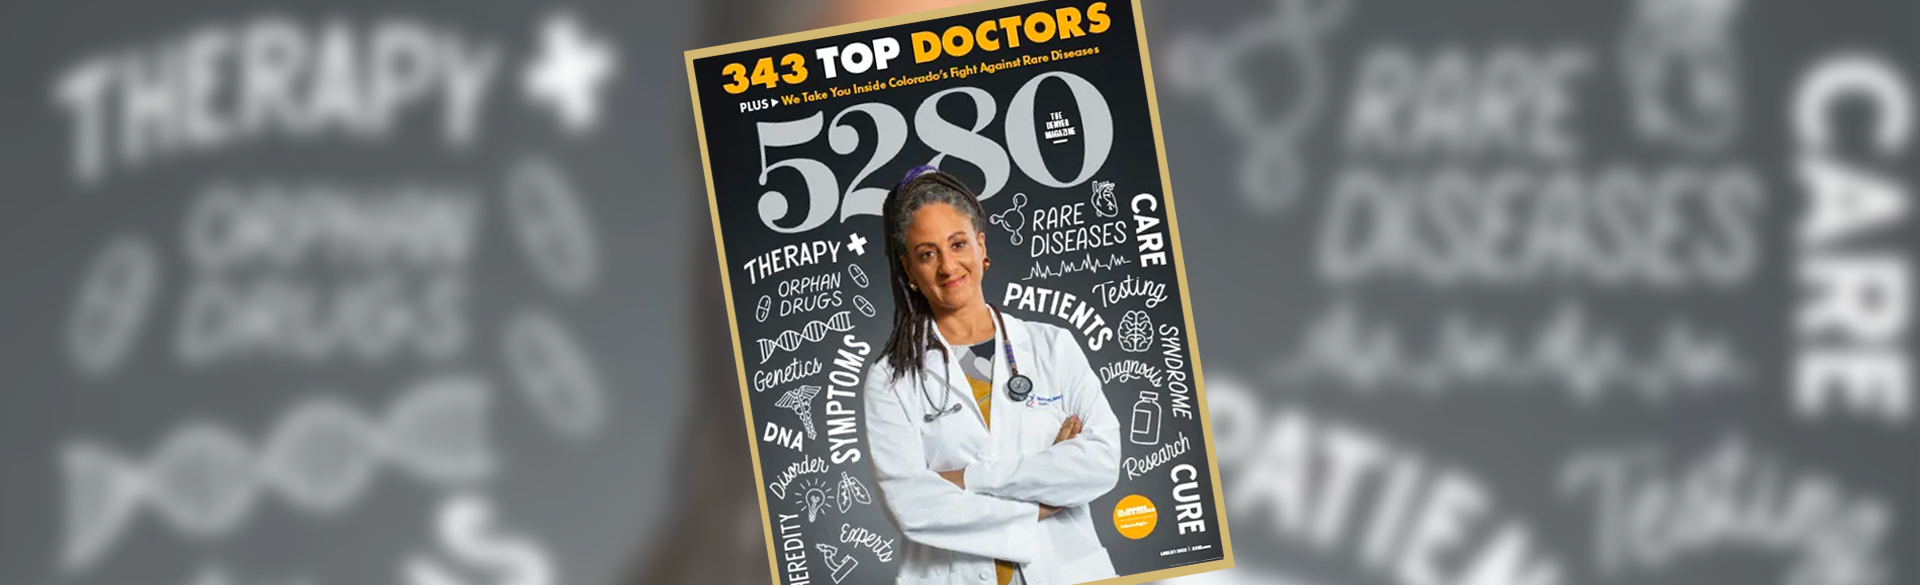 193 CU Faculty Recognized as 5280 Magazine Top Doctors for 2022